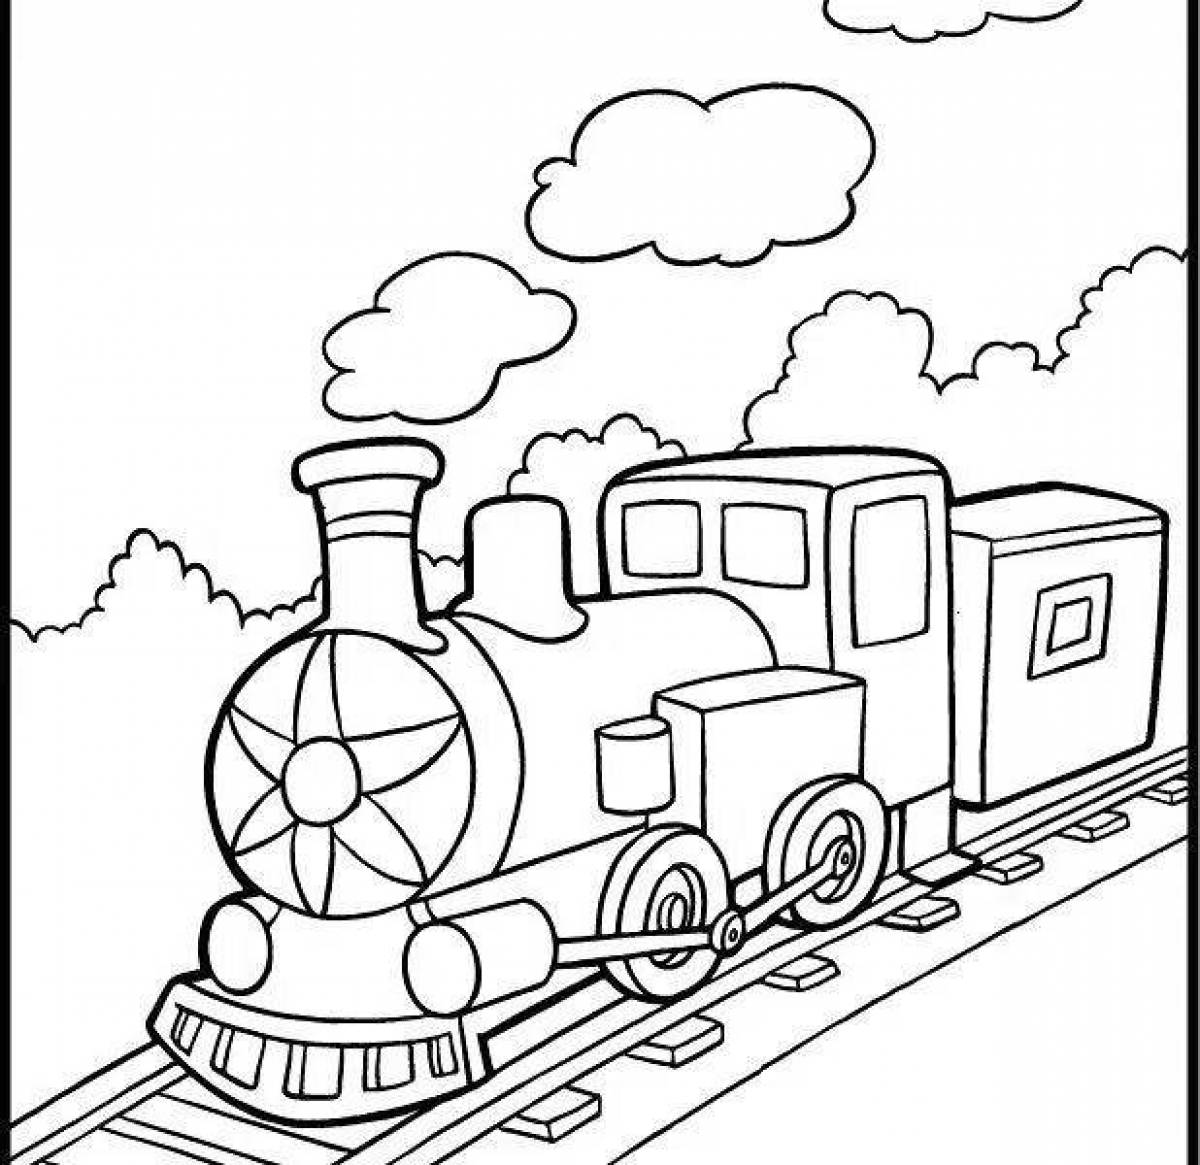 Charles the adorable engine coloring page